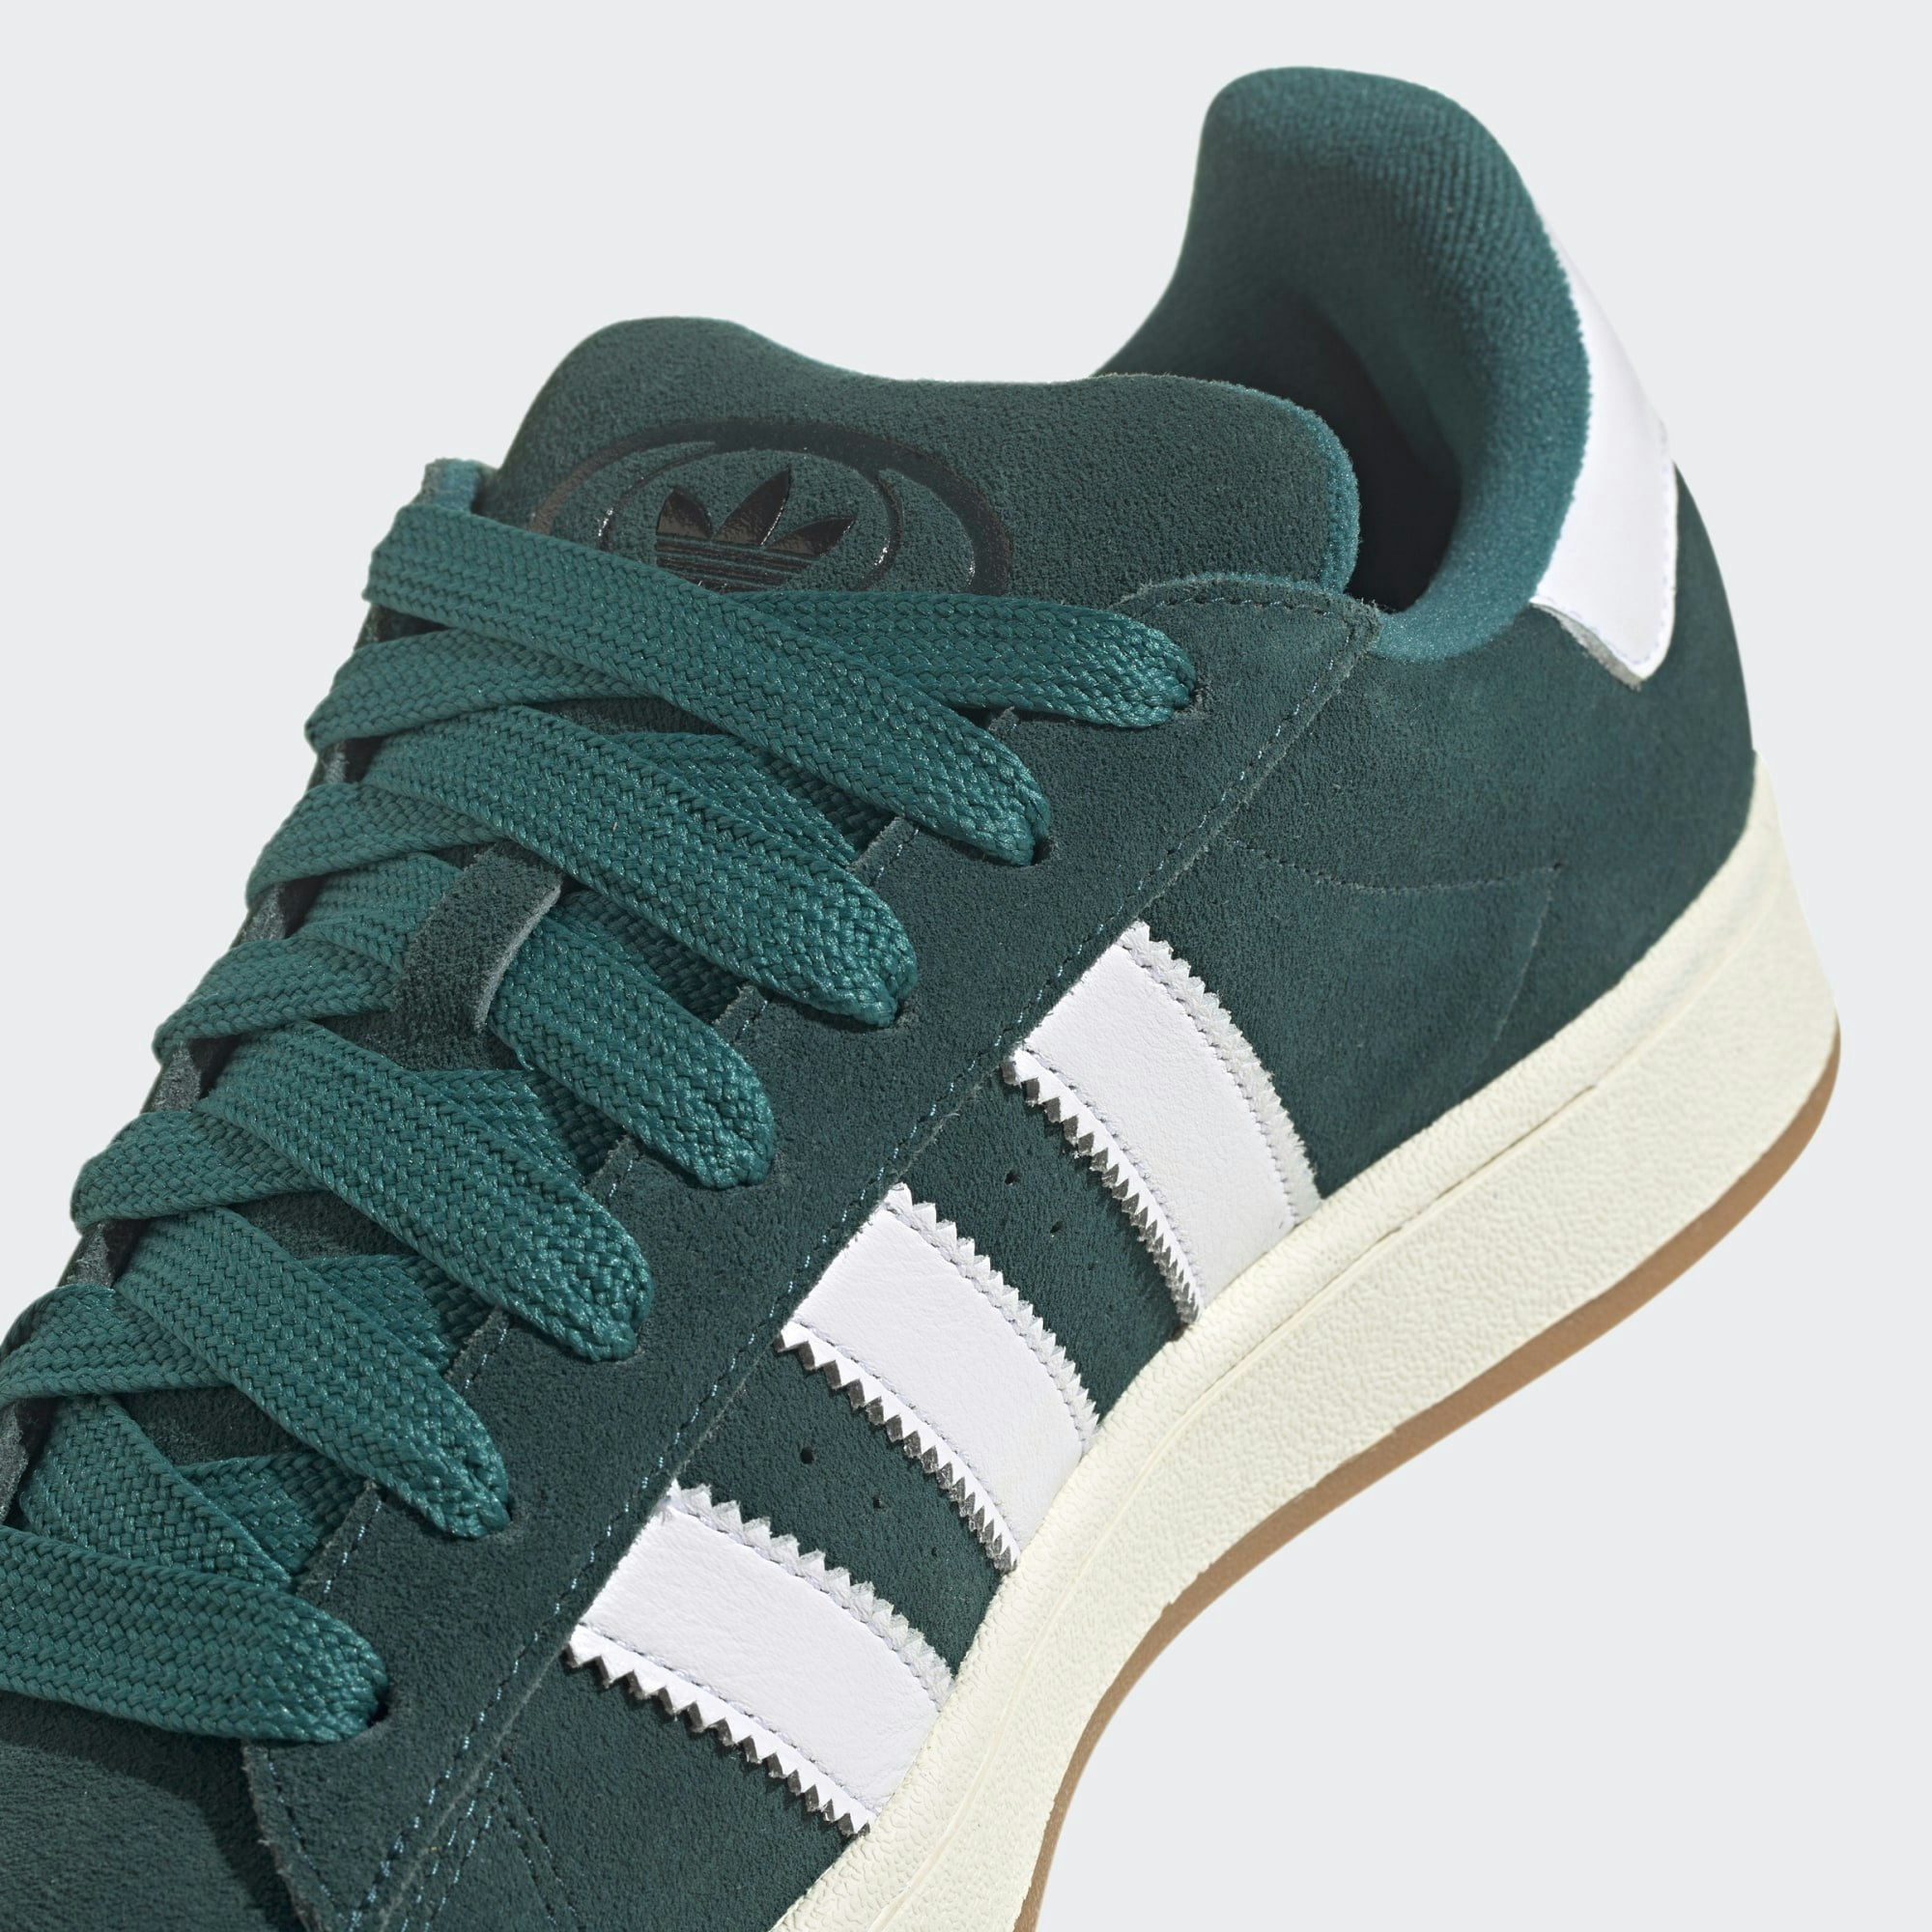 adidas Campus 00s "St Forest Glade"